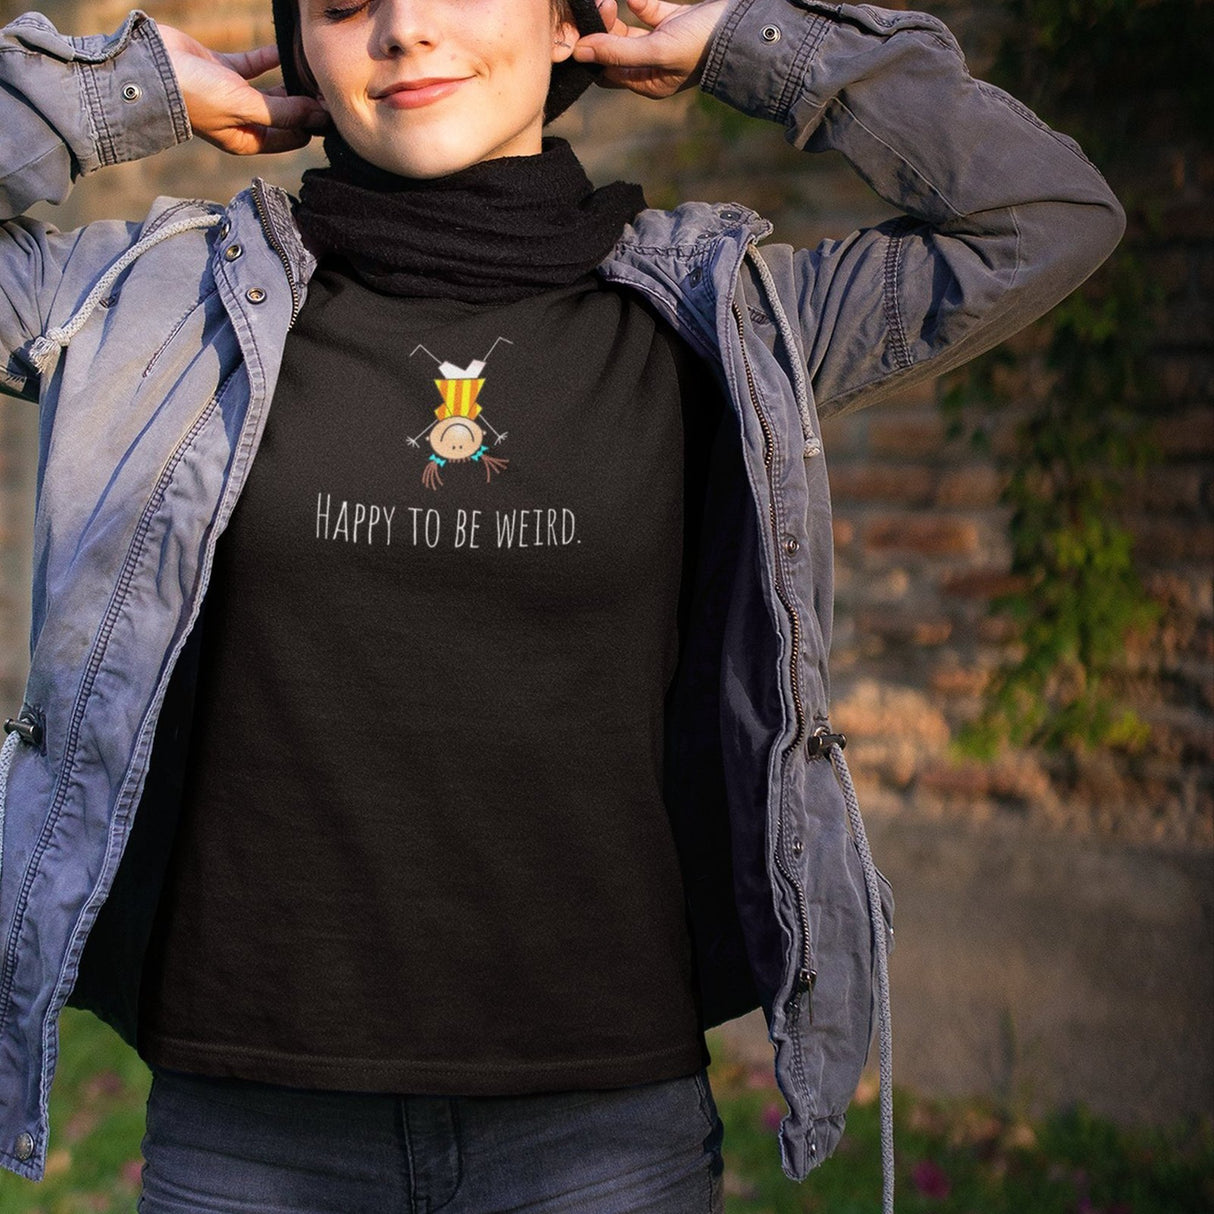 happy-to-be-weird-happy-tee-trending-t-shirt-quote-tee-inspirational-t-shirt-lgbt-tee#color_black